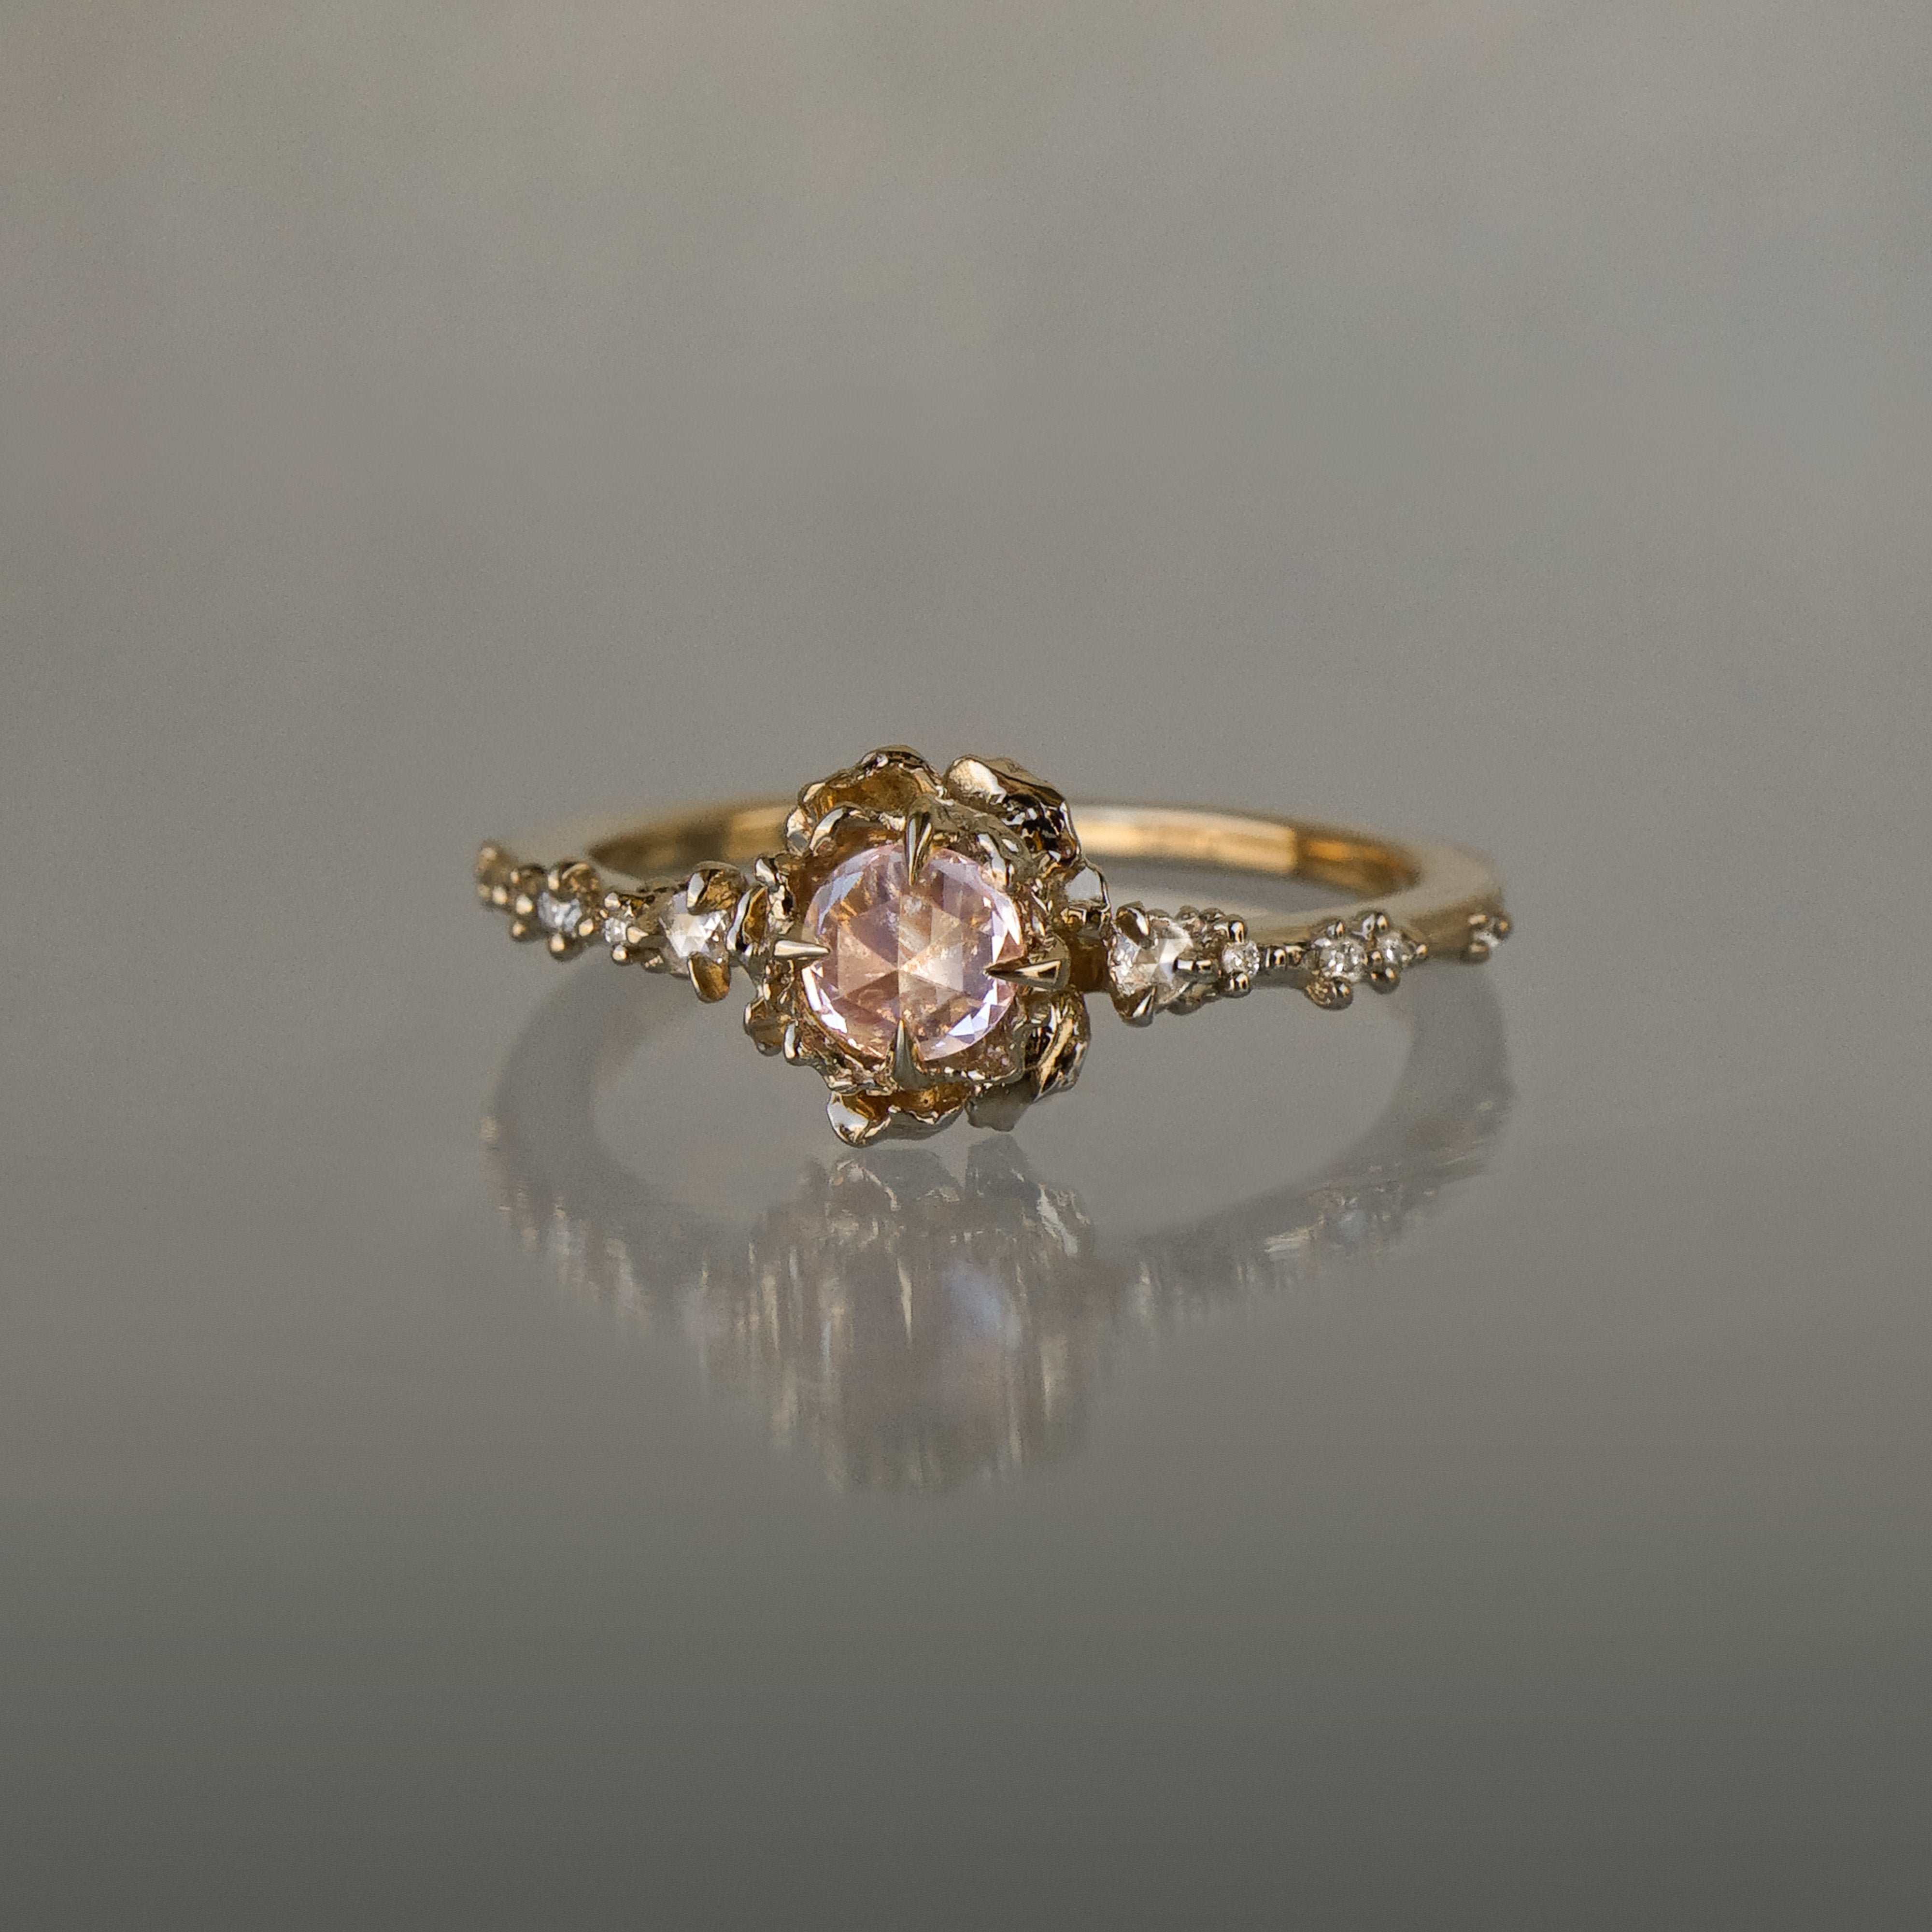 A delicate, one of a kind "Nereid" style engagement ring by Laurie Fleming Jewellery in yellow gold. The ring features a round rose cut light pink sapphire held by four dainty claws, nestled in hand-carved floral peony petals. Rose cut and brilliant diamonds drip down the band. The ring is situated on a medium grey background.